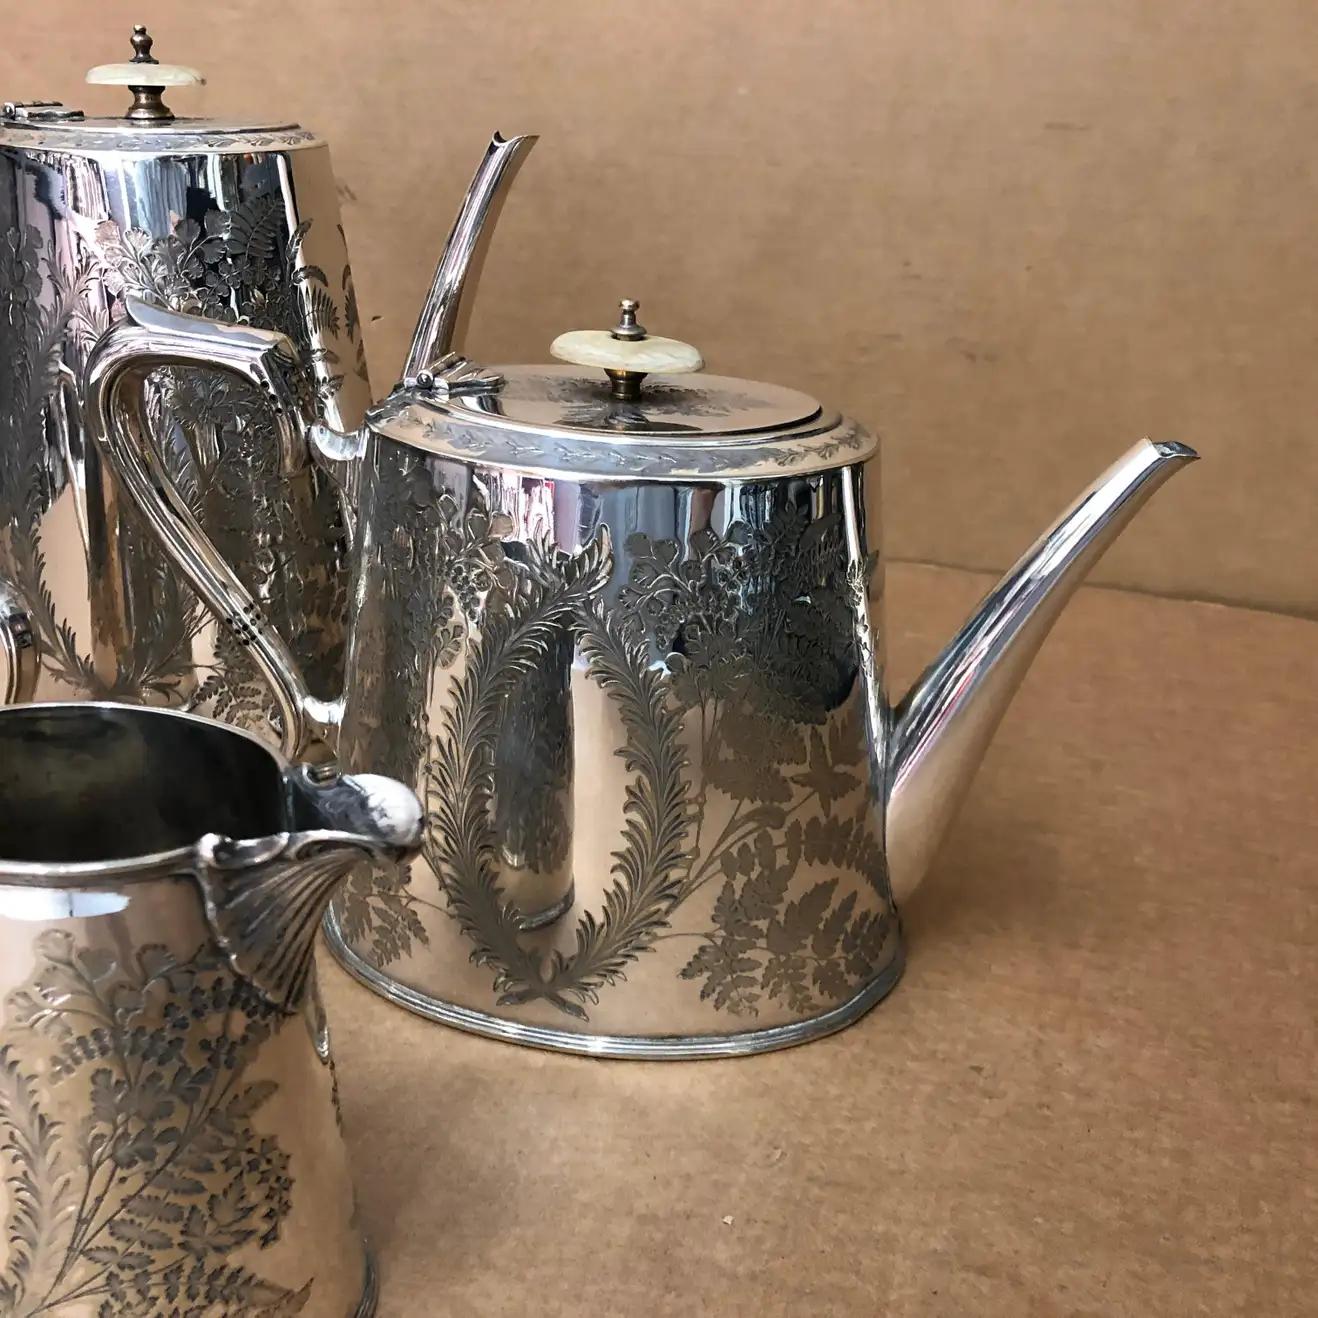 The Walker & Hall tea set is made of four pieces, nice engraving and good conditions overall. It's marked on the bottom.